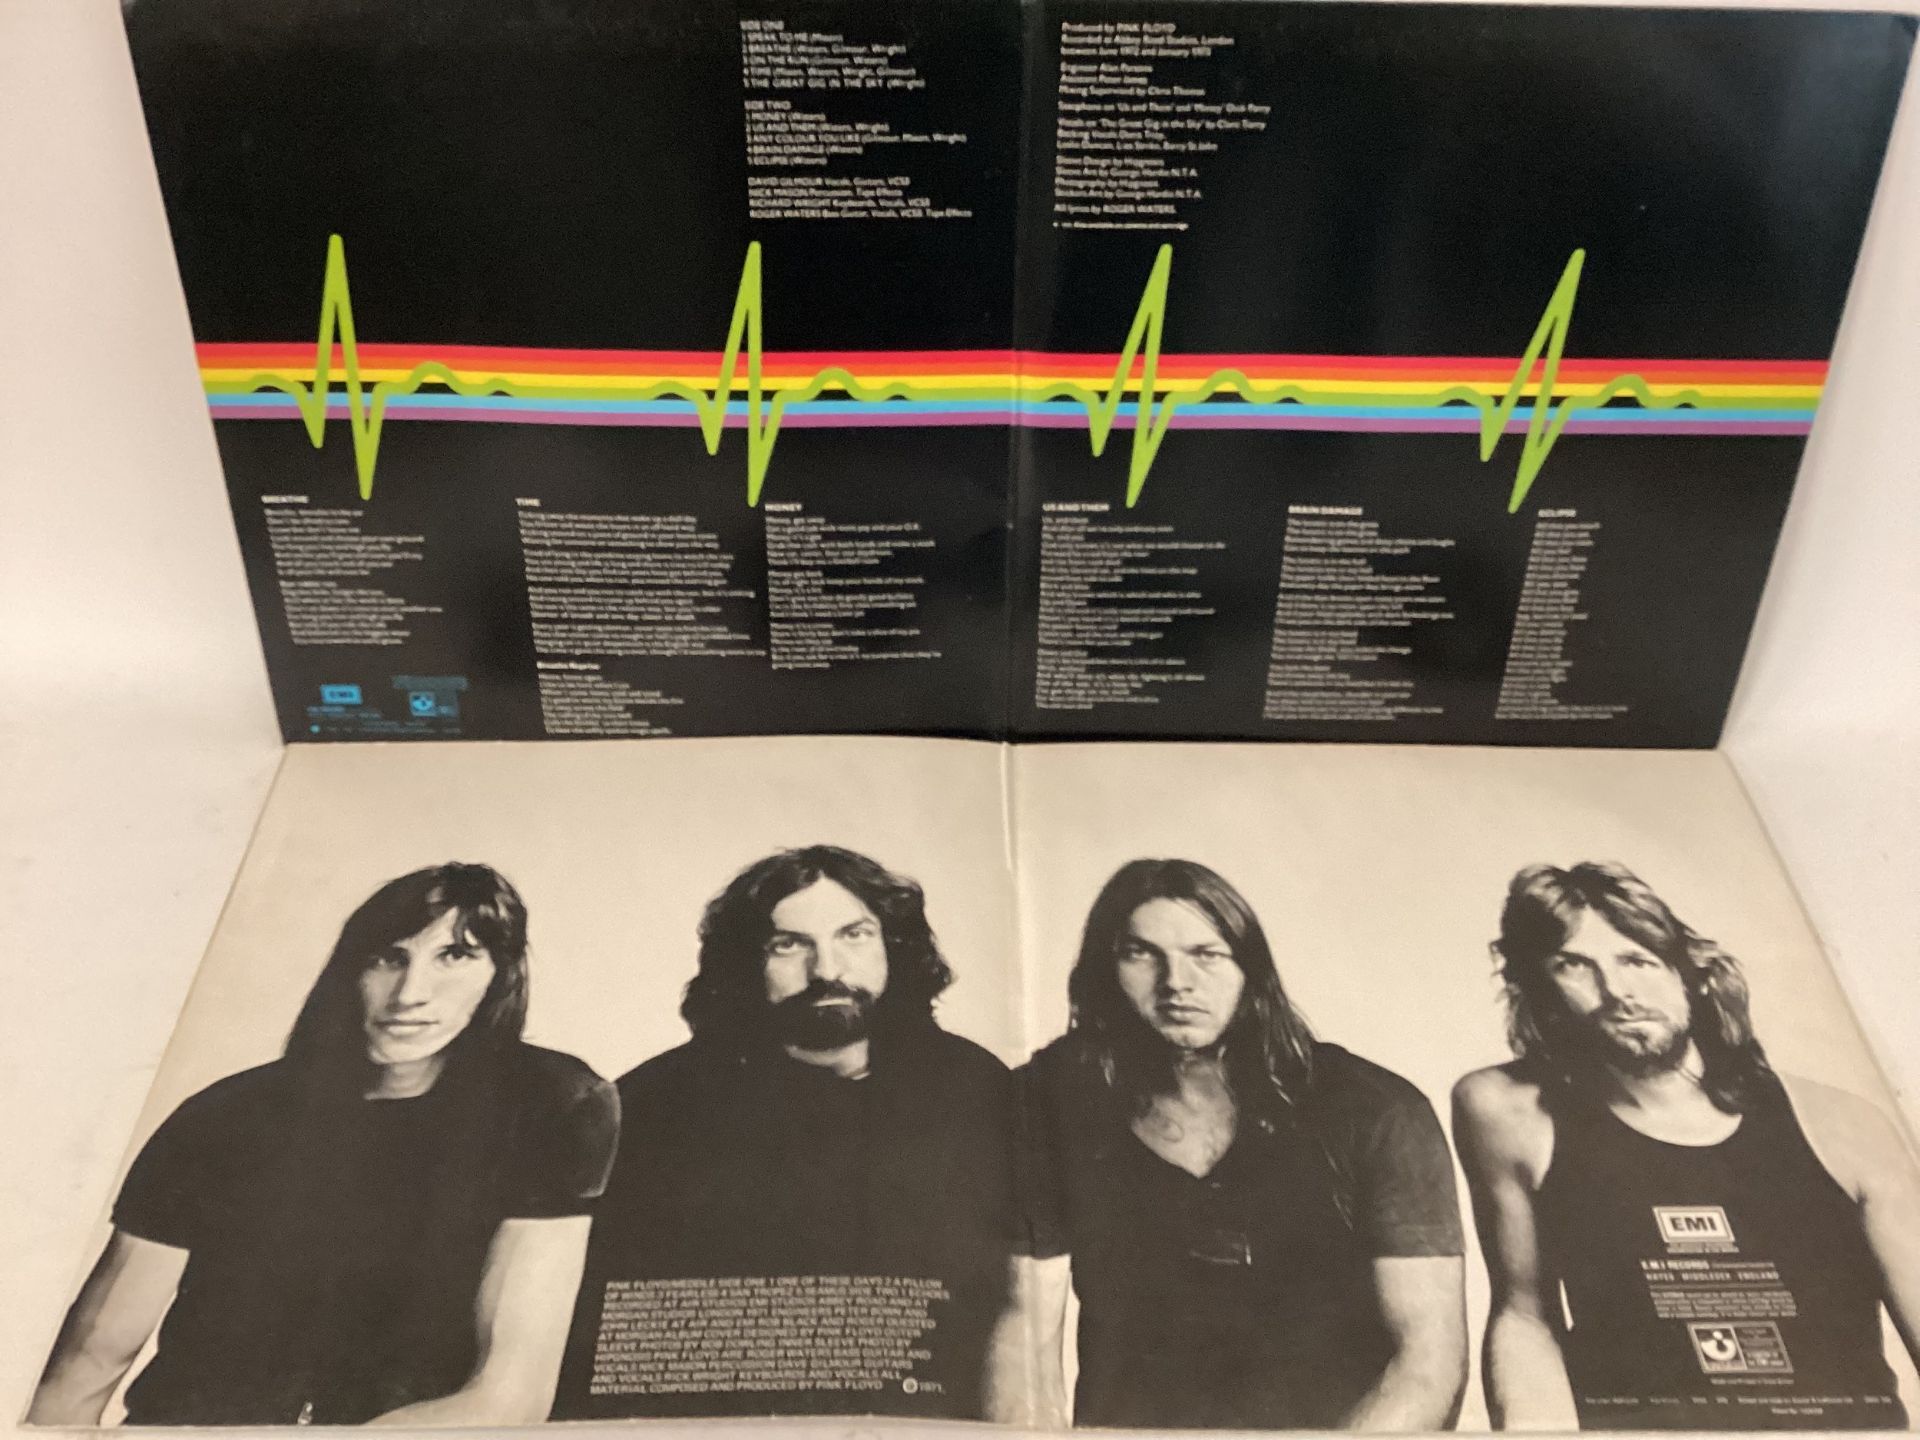 PINK FLOYD VINYL LP RECORDS X 6. Titles here include - Meddle in Gatefold textured sleeve SHVL 795 - Image 3 of 4